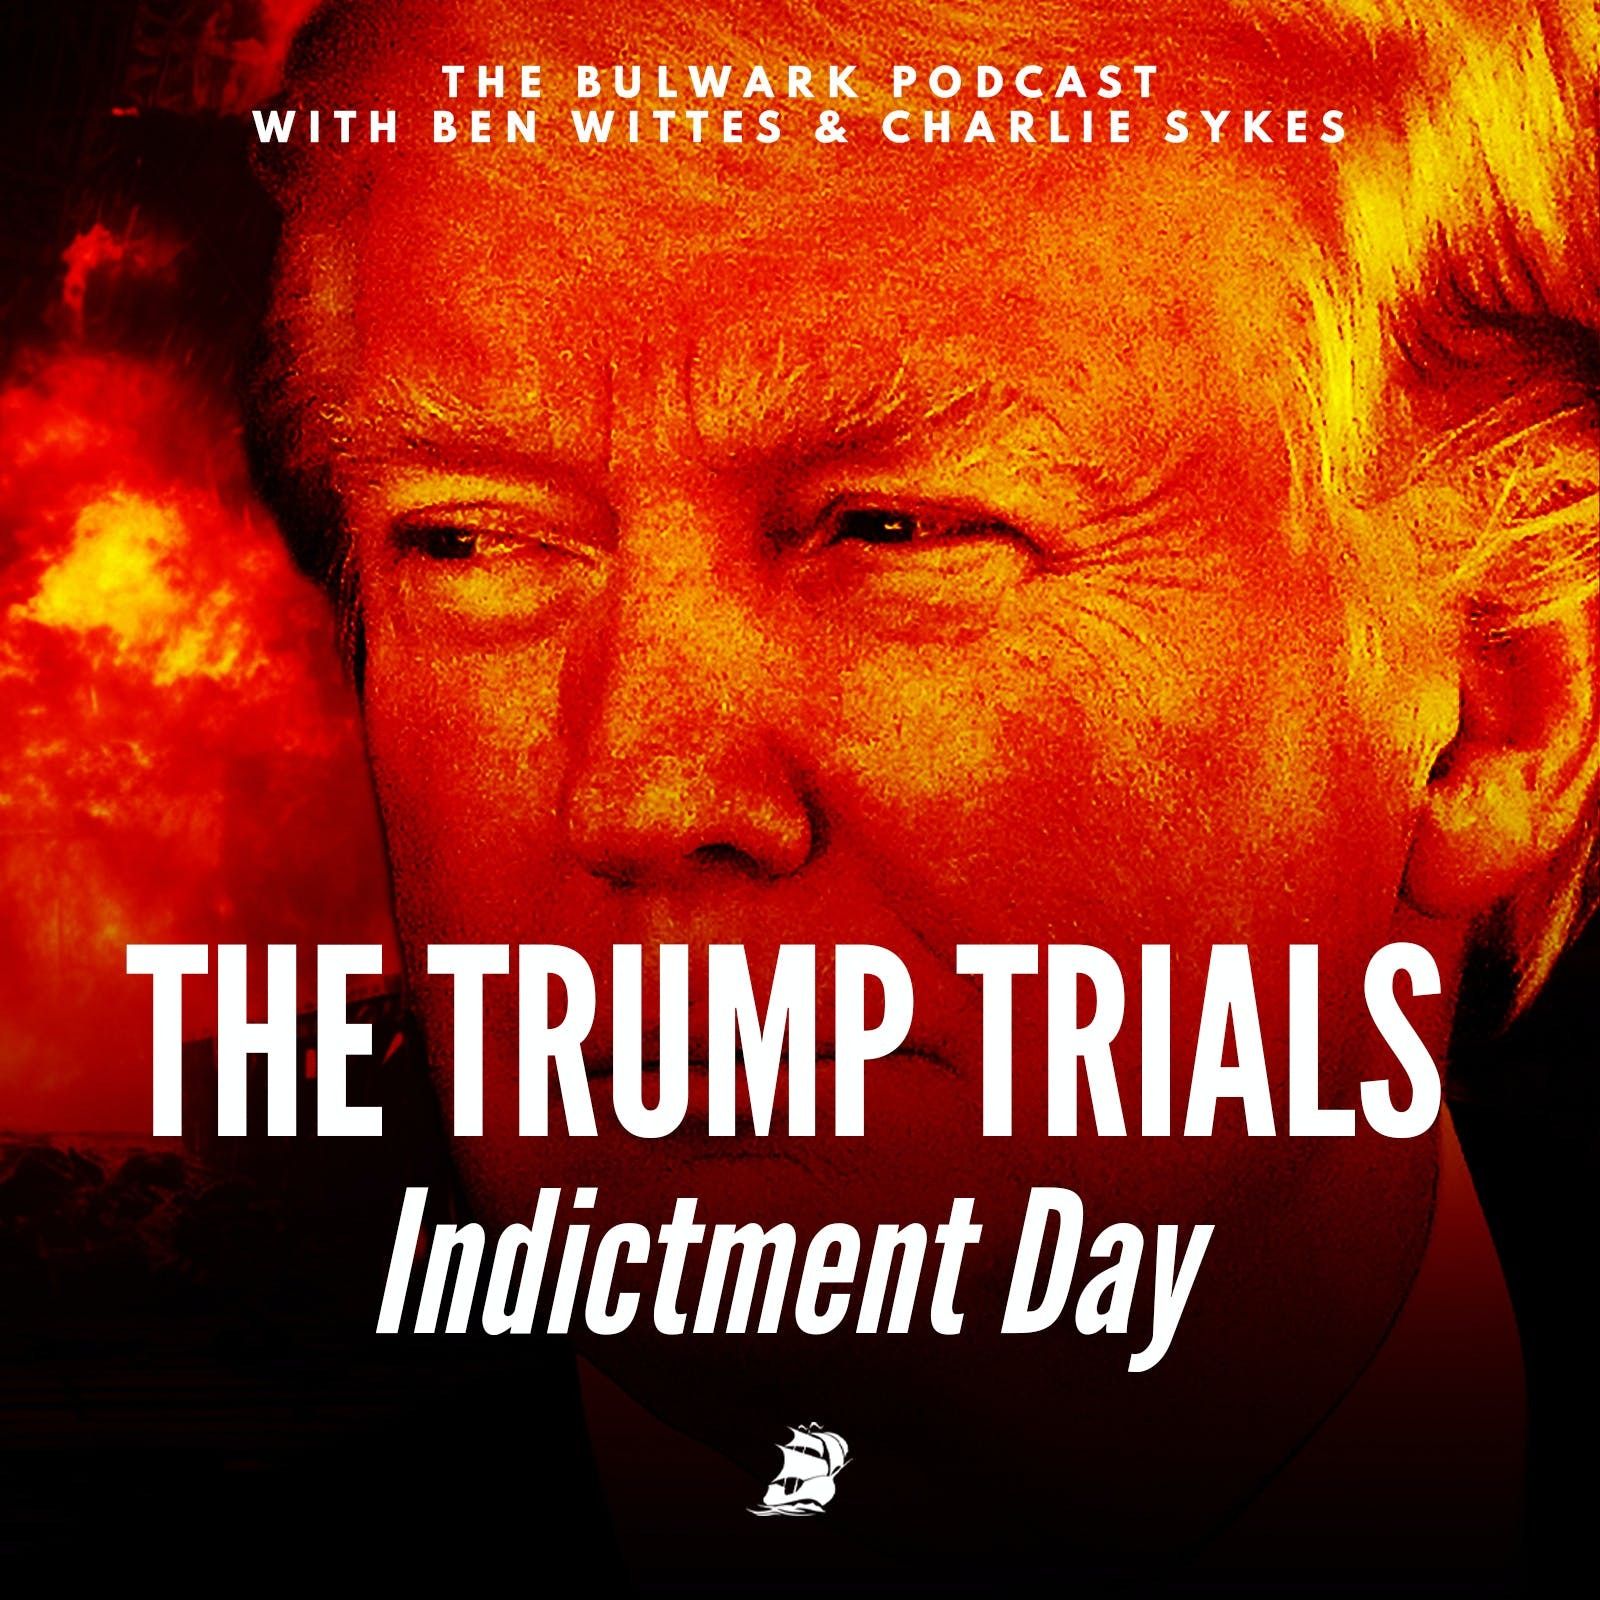 Indictment Day by The Bulwark Podcast